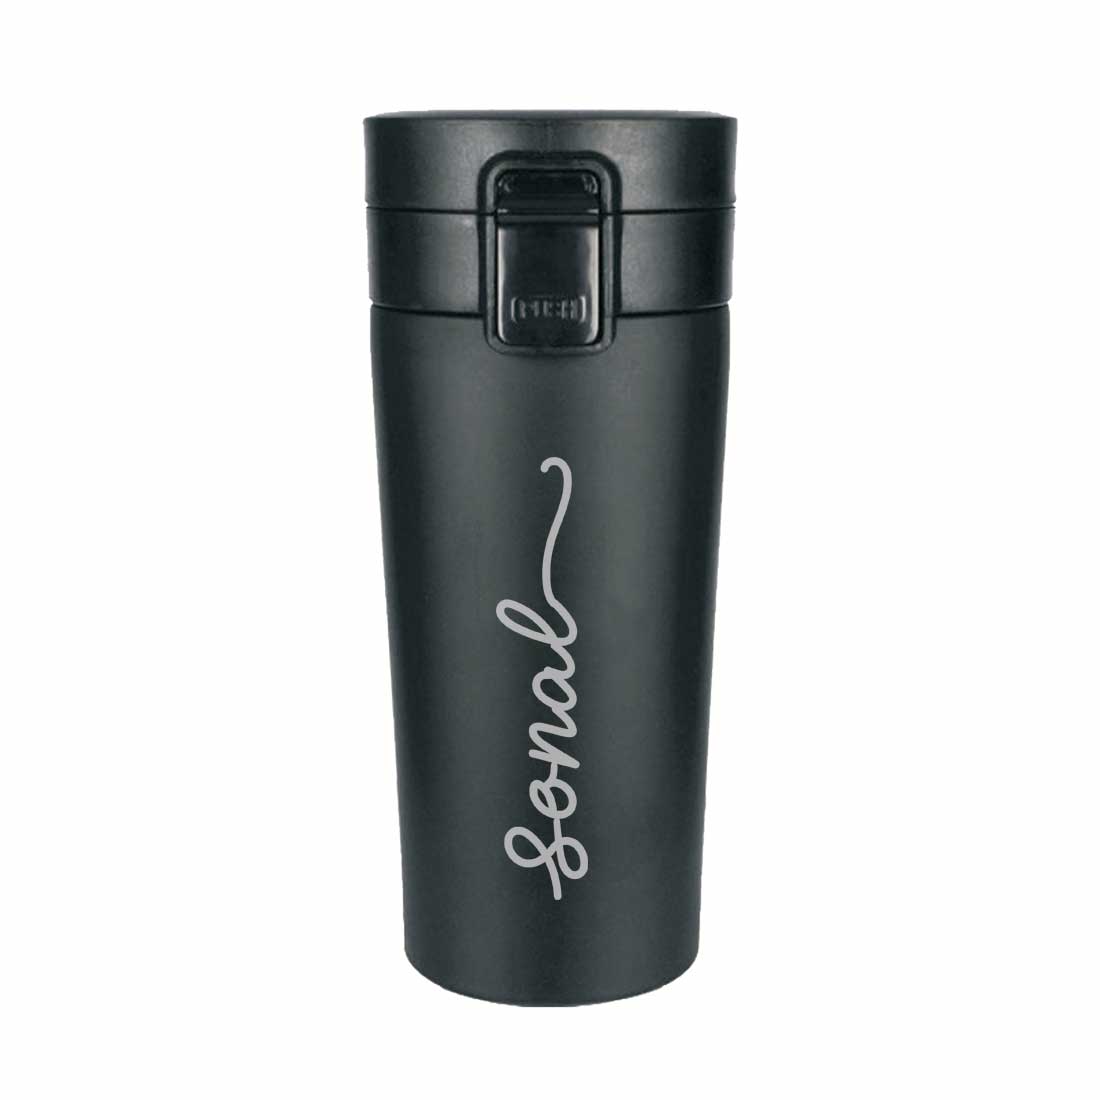 Personalized Travel Coffee Flask Sipper With Name Engraved Stainless Steel Flask  - Add Name